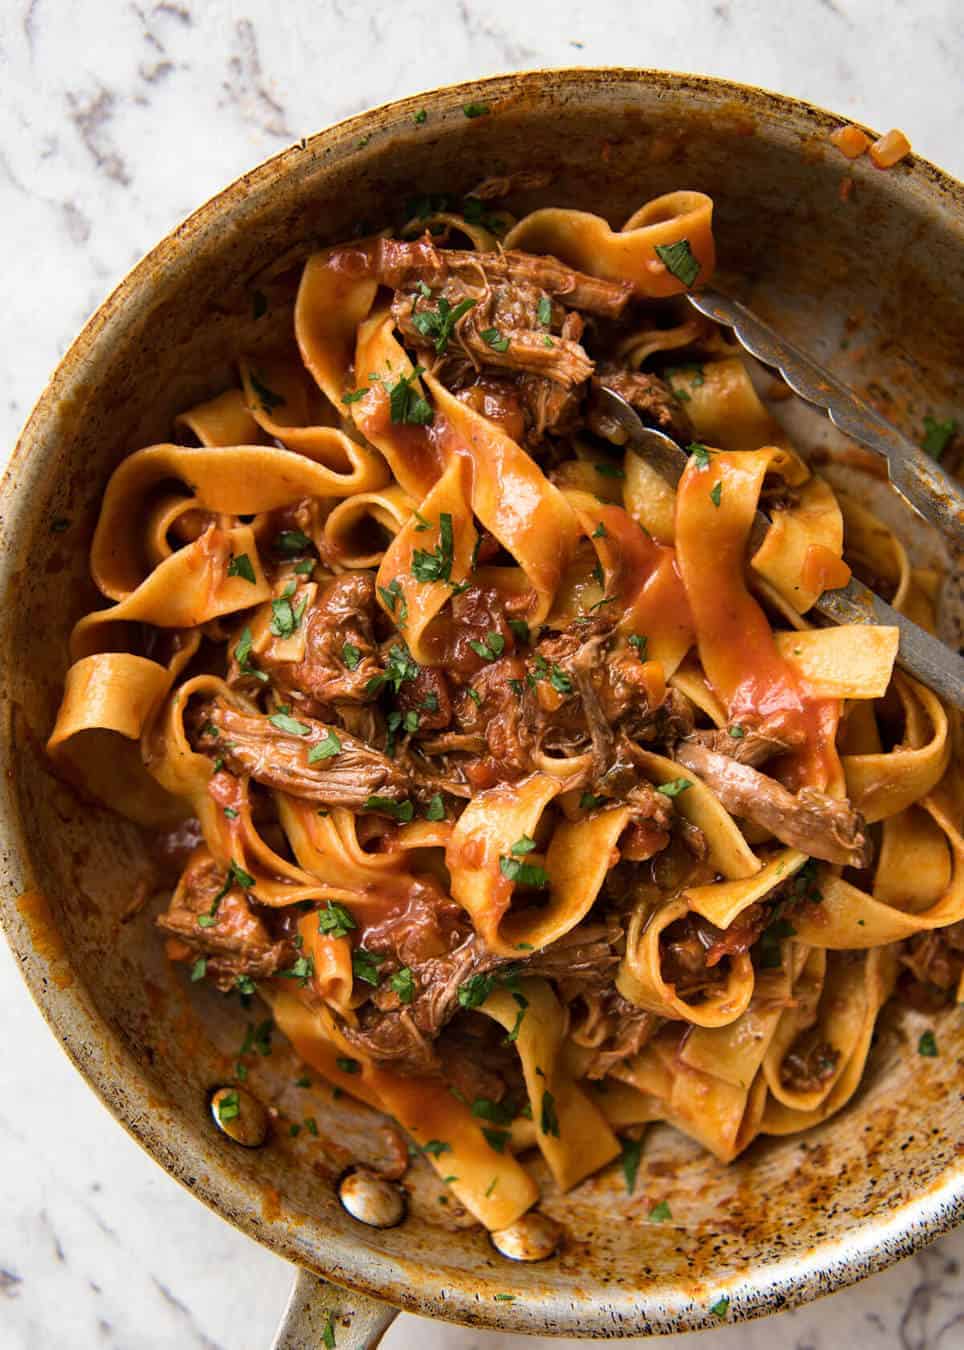 Rich, slow cooked Shredded Beef Ragu Sauce with pappardelle pasta. Stunning Italian comfort food at its best. recipetineats.com